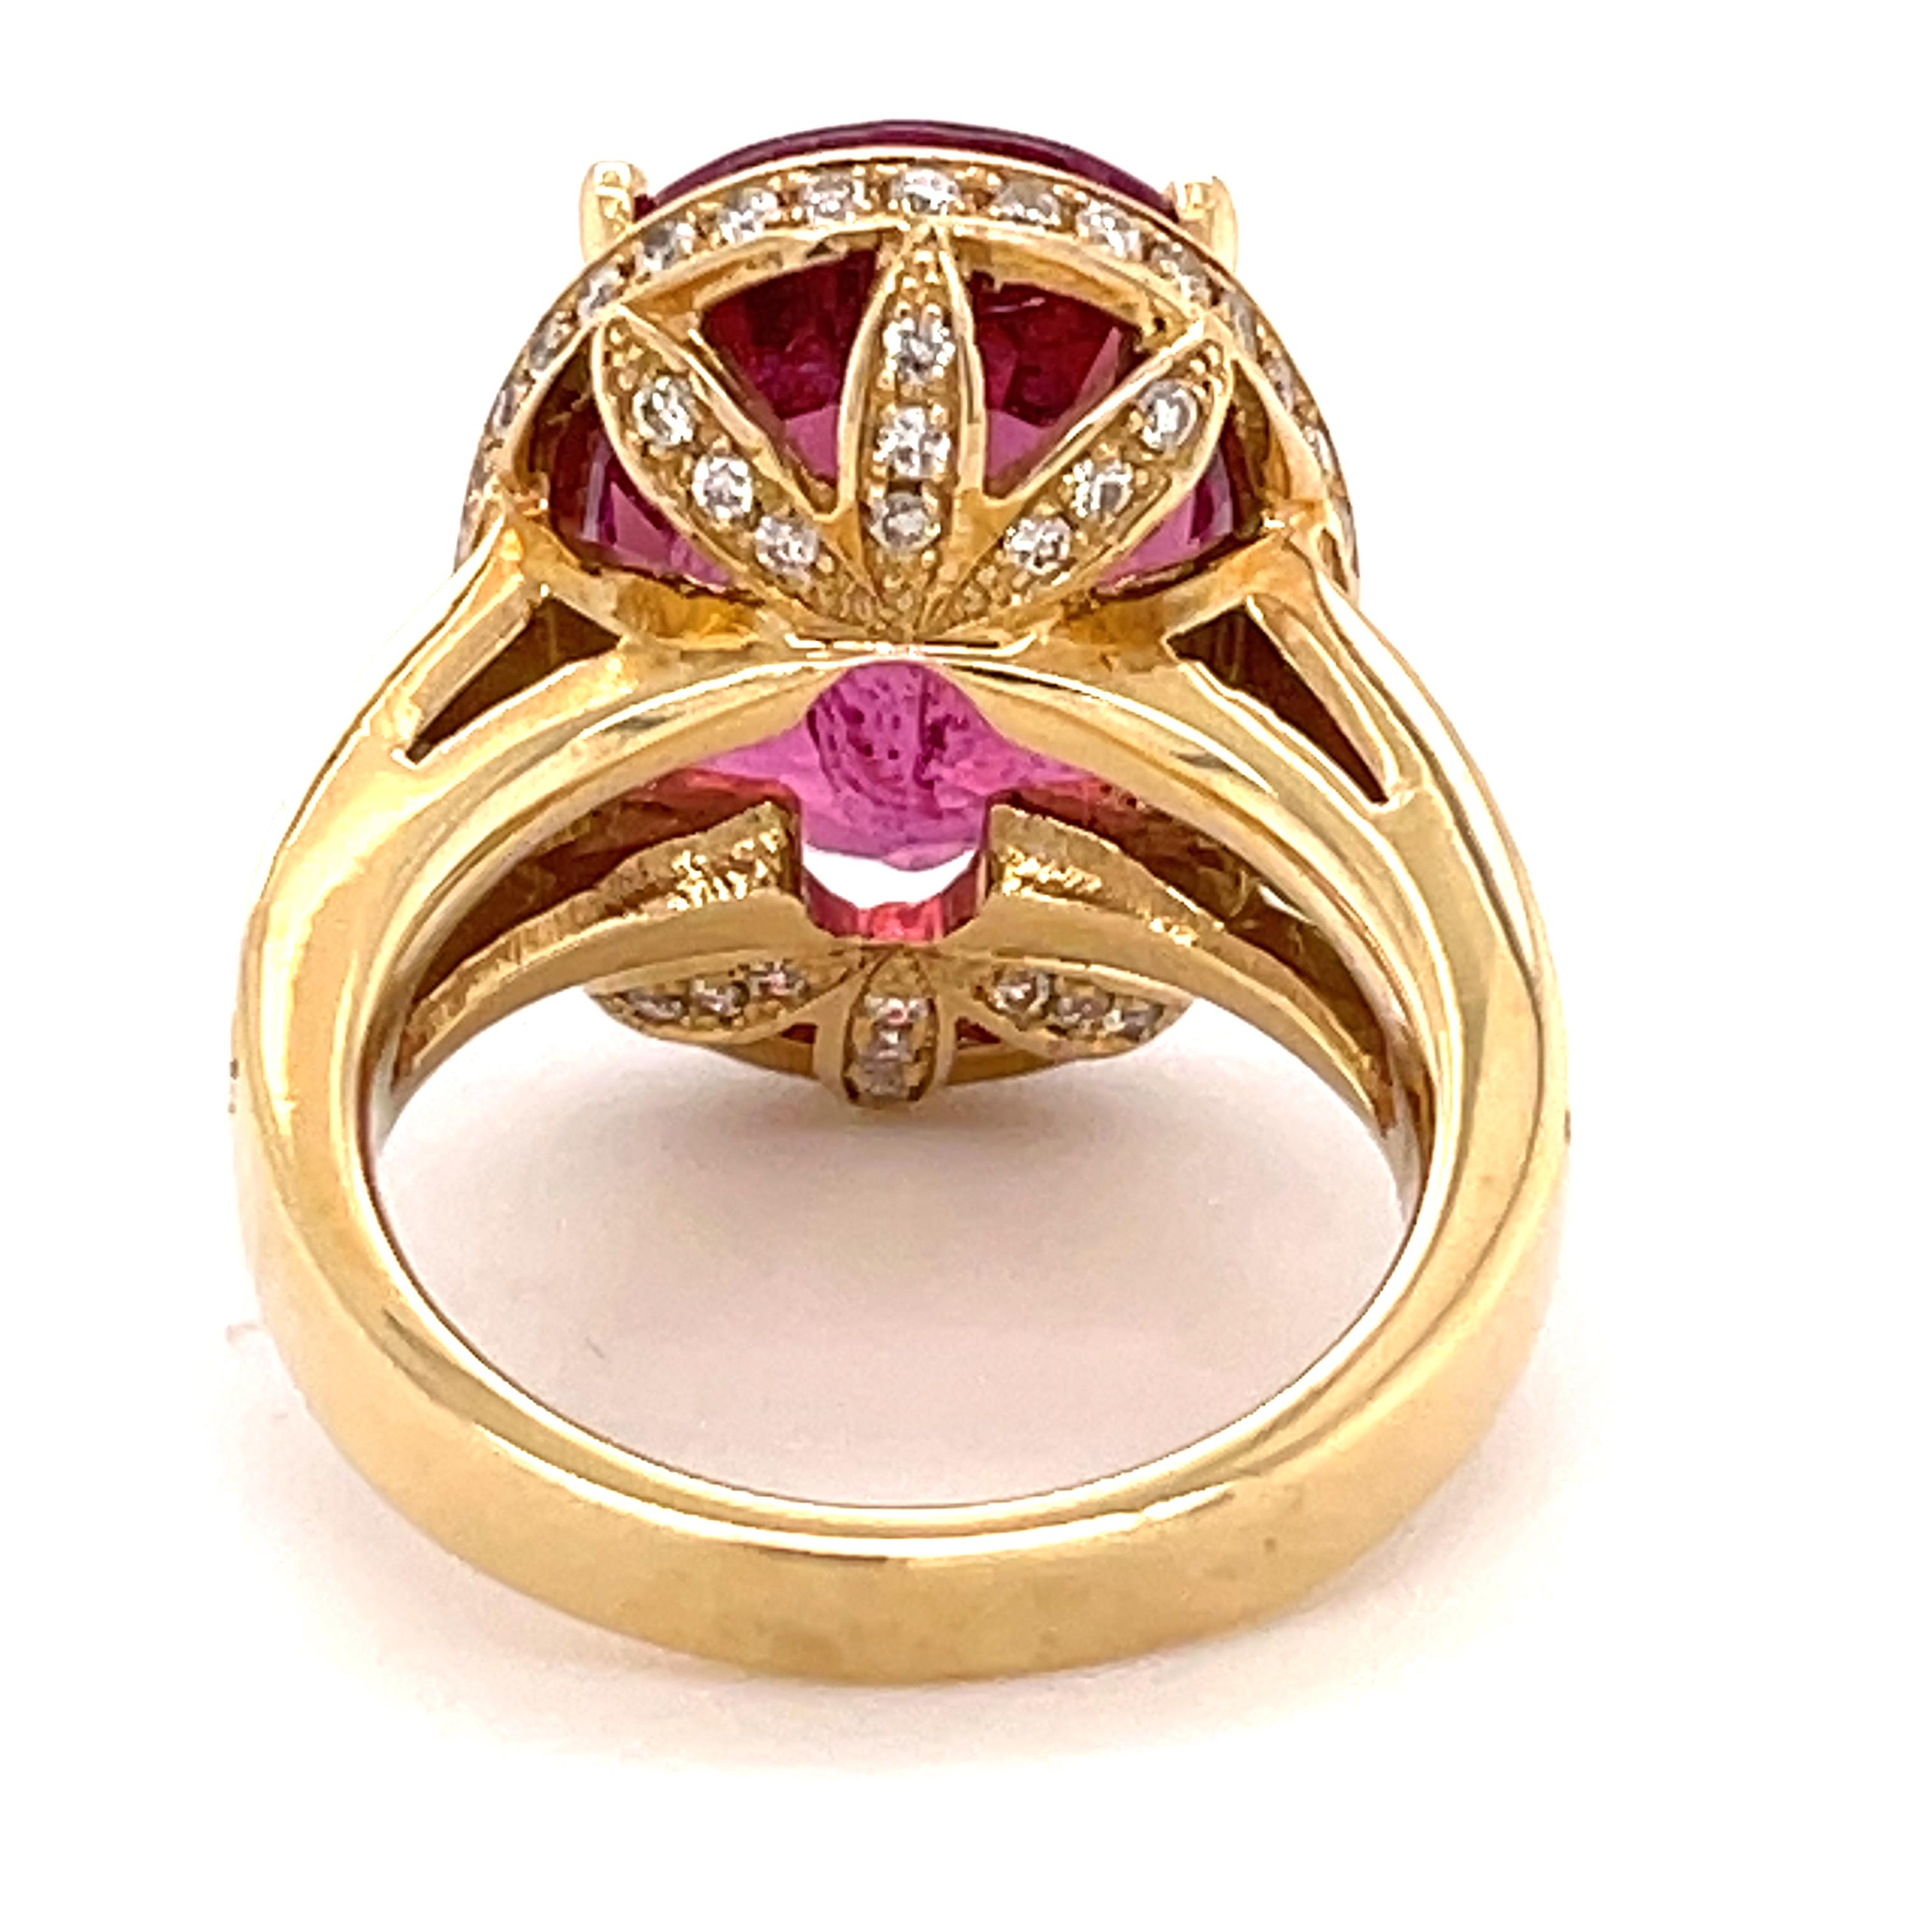 Pink Tourmalines with no inclusions are very rare. They are accepted in the trade with internal identifying characteristics and are classified as type 3 stones. The vibrant pink/purple Tourmaline in this ring weighs 11.49 carats (16.2 x 13.0 mm) and